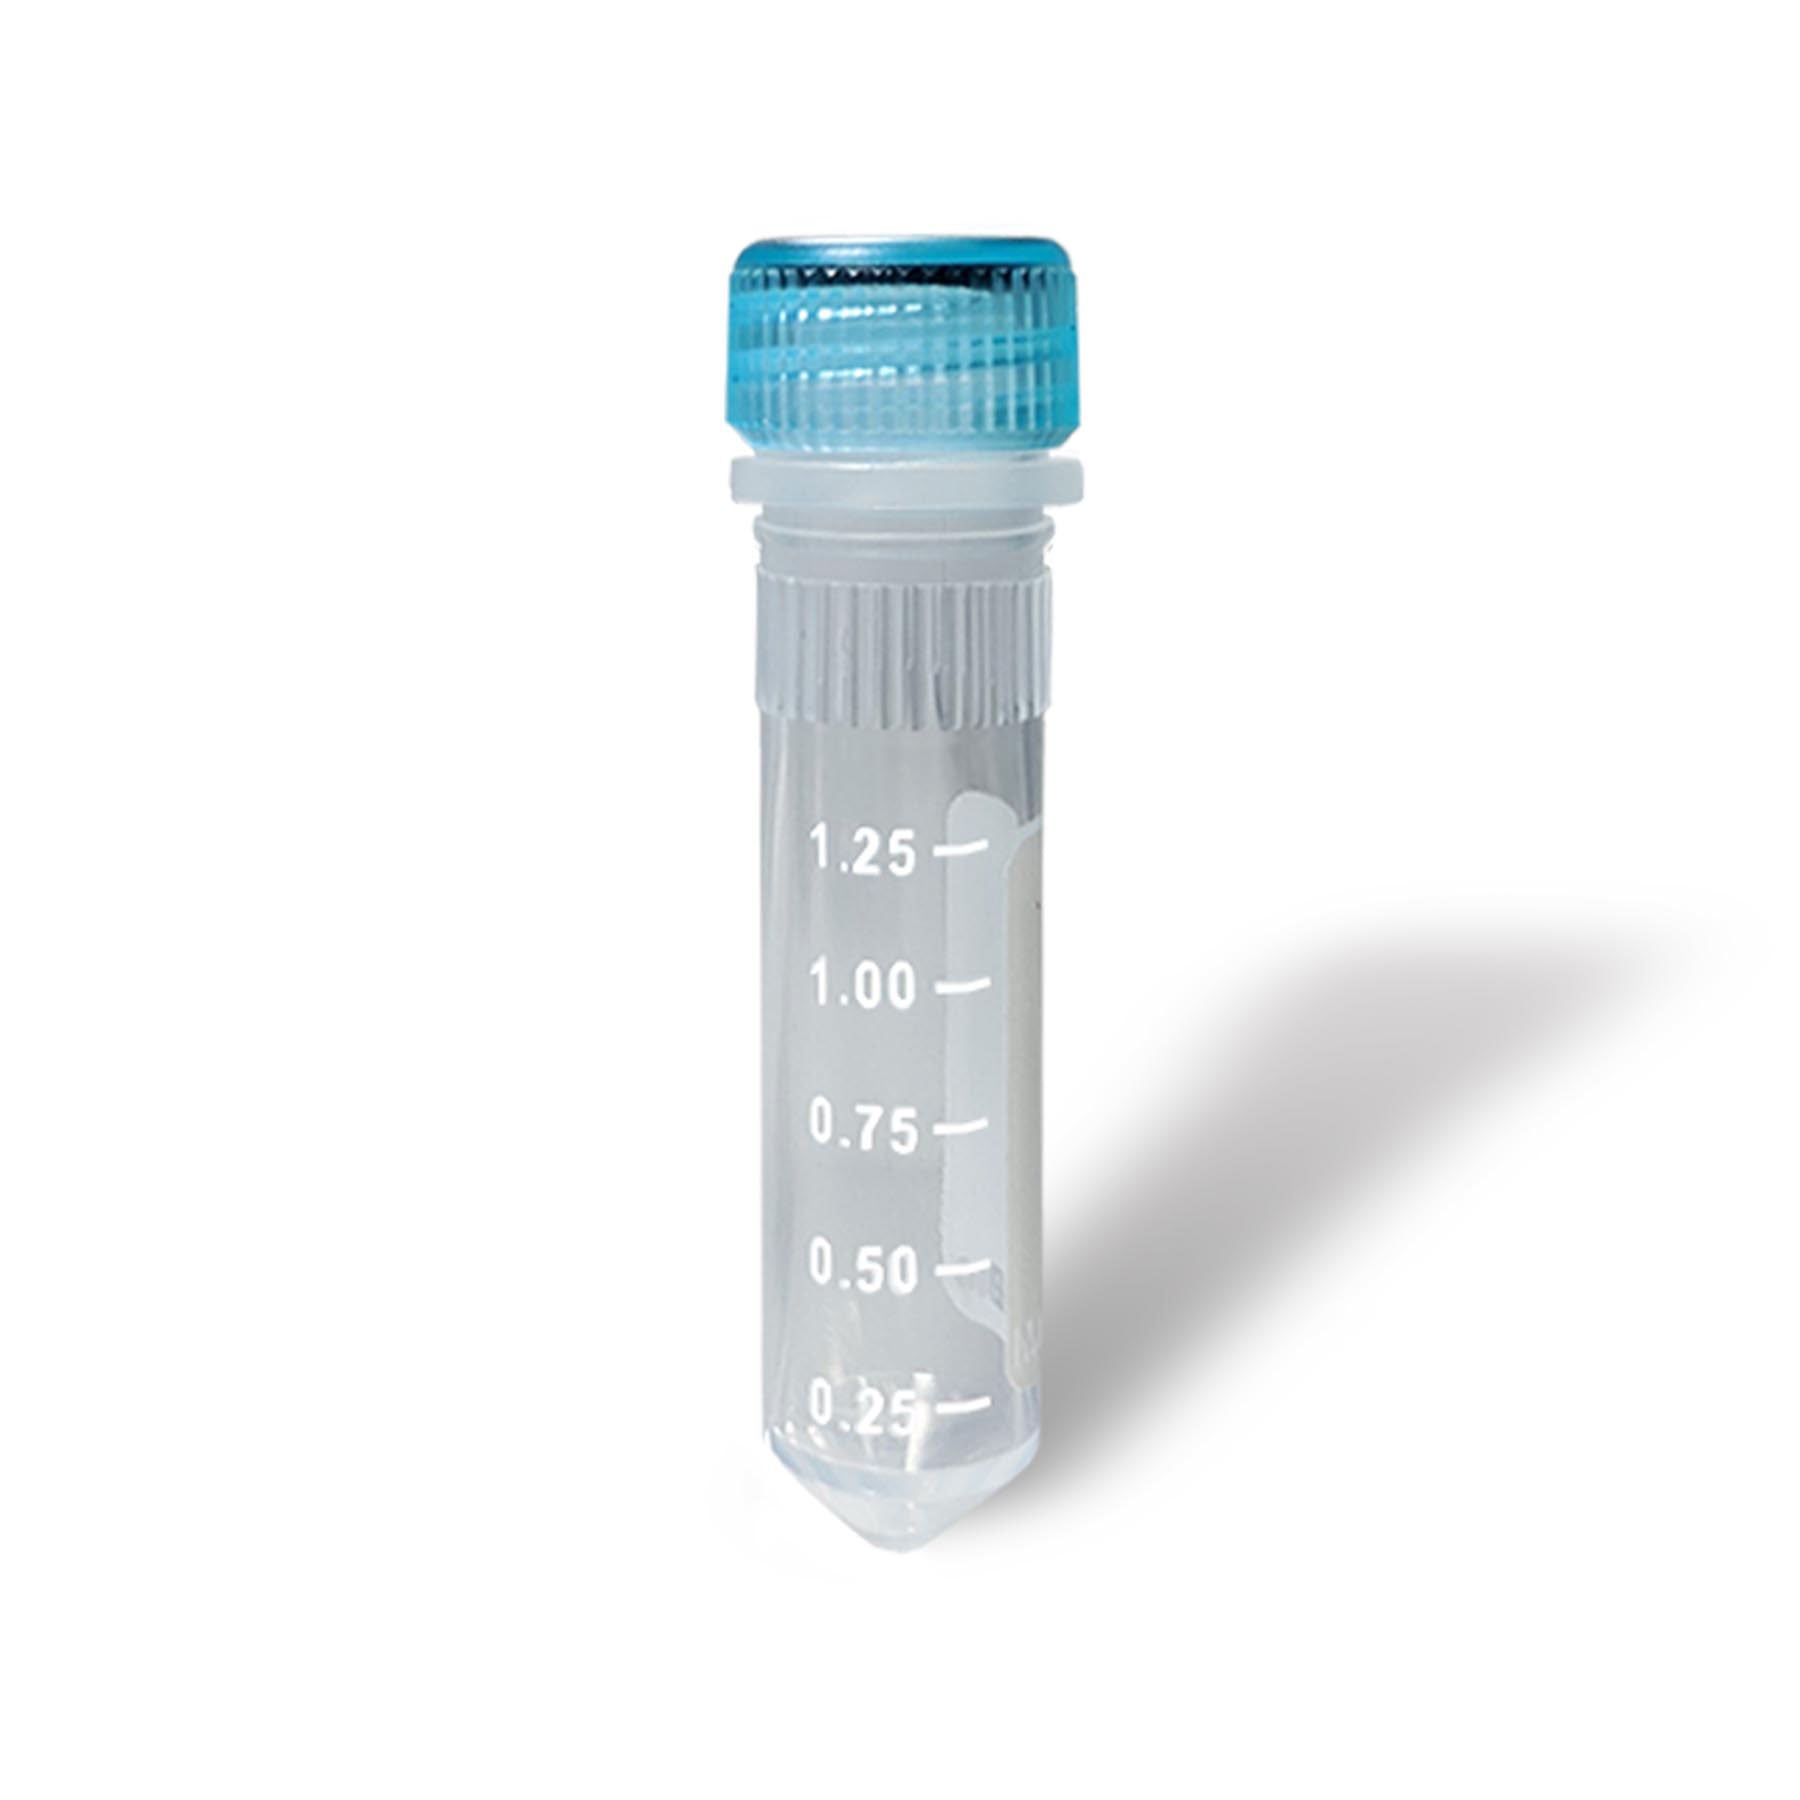 MTC Bio C3220-CG, Clearseal Microcentrifuge Tube, 2.0ml, Sterile, Printed Graduations, Conical Bottom, 20 Resealable Bags of 50 Tubes, 1000/cs